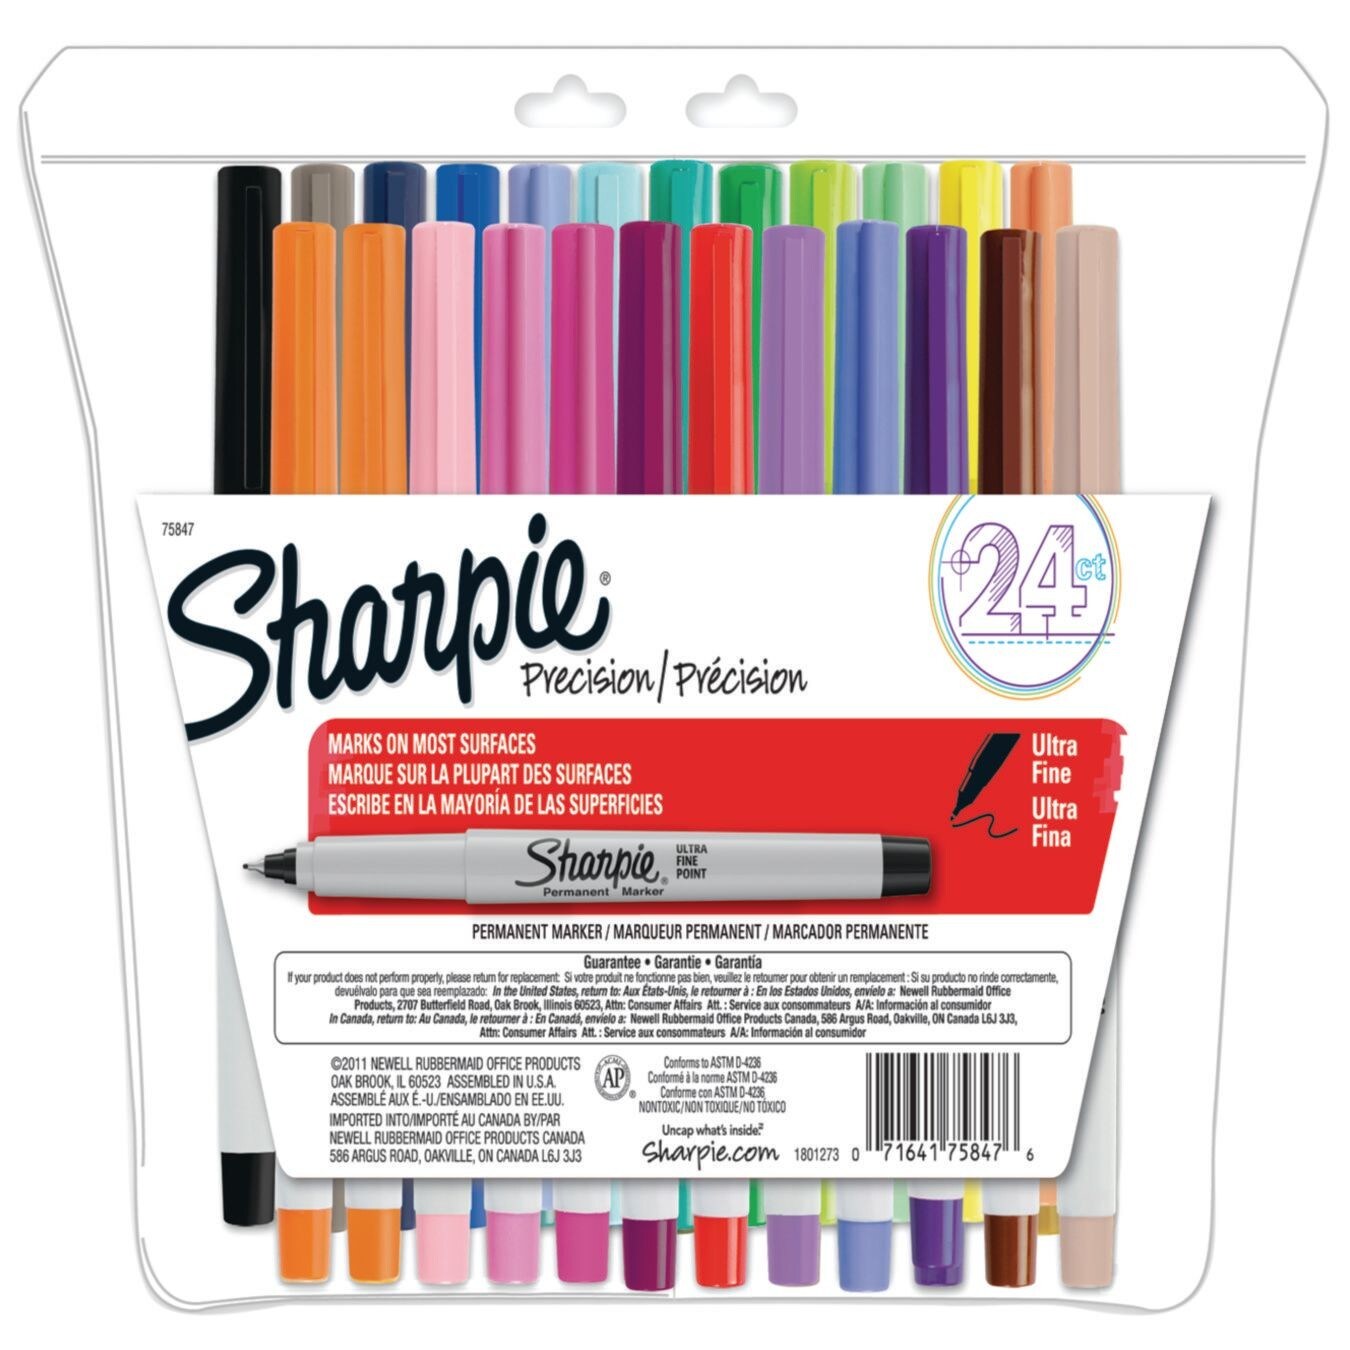 Colored Permanent Markers, Fine Point - Set of 24